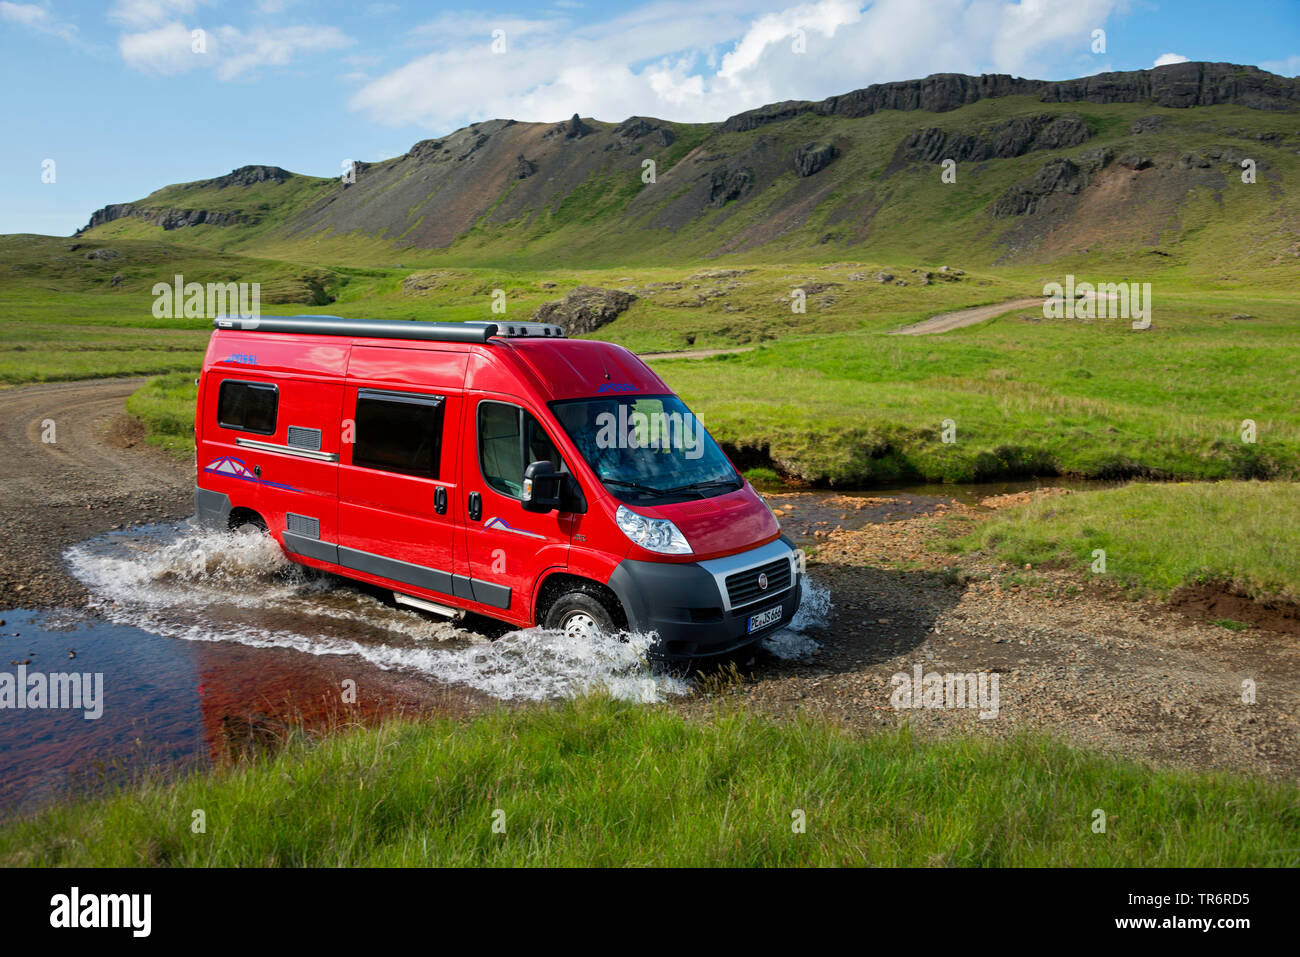 red recreational vehicles crossing river, Iceland, Kollumulavegur Stock Photo